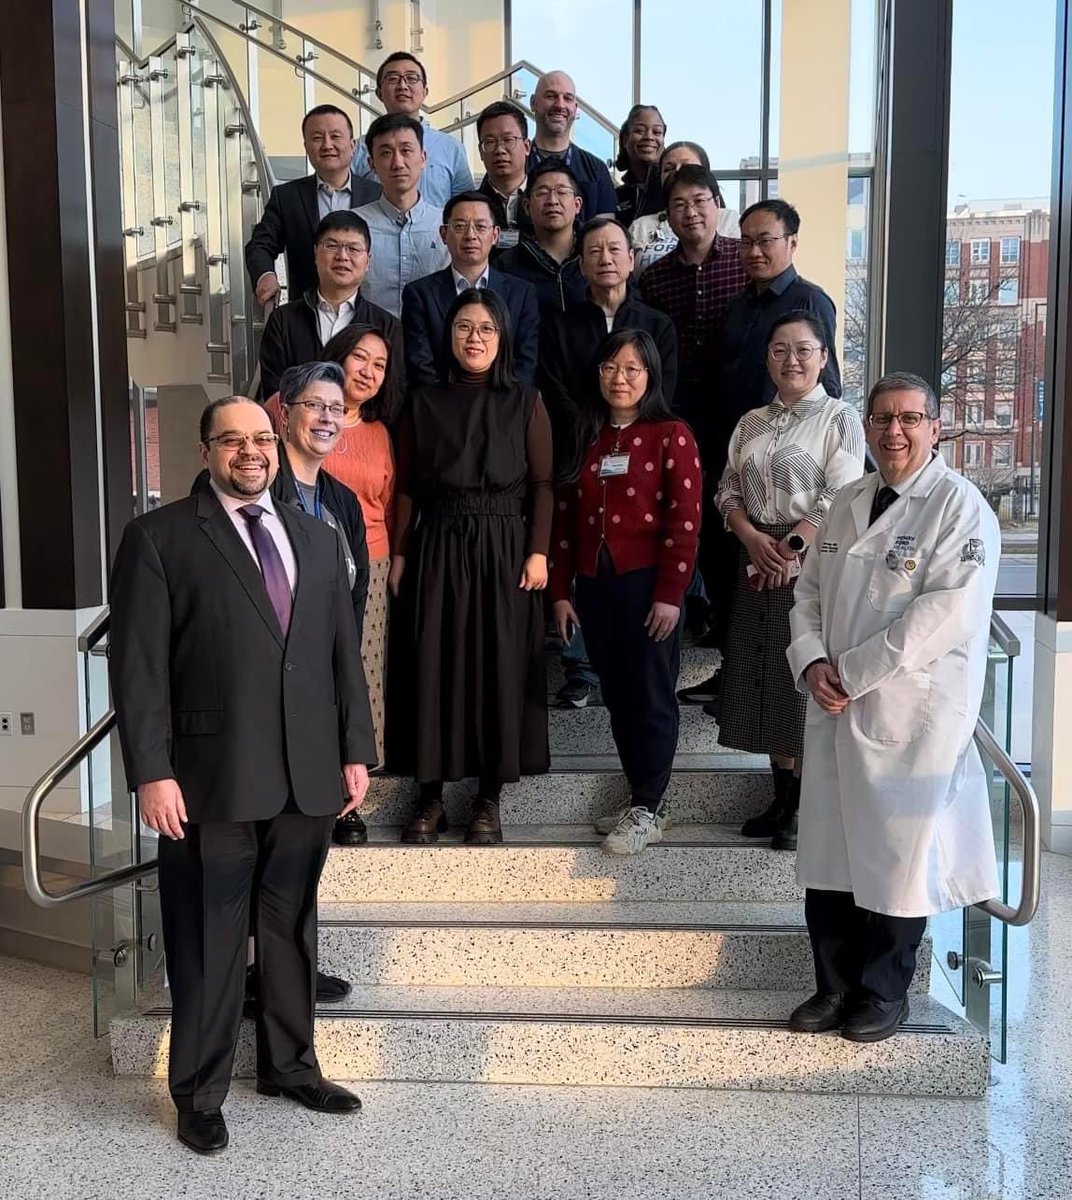 Congratulations to our #RadiationOncology team their SRS/SBRT course at HFH has empowered 500 physicians, physicists, and therapists globally! Some of the recent attendees journeyed from #China. Repost from @SalimSiddiquiMD #ImpactingCancerCareGlobally #PursuingPerfectCare